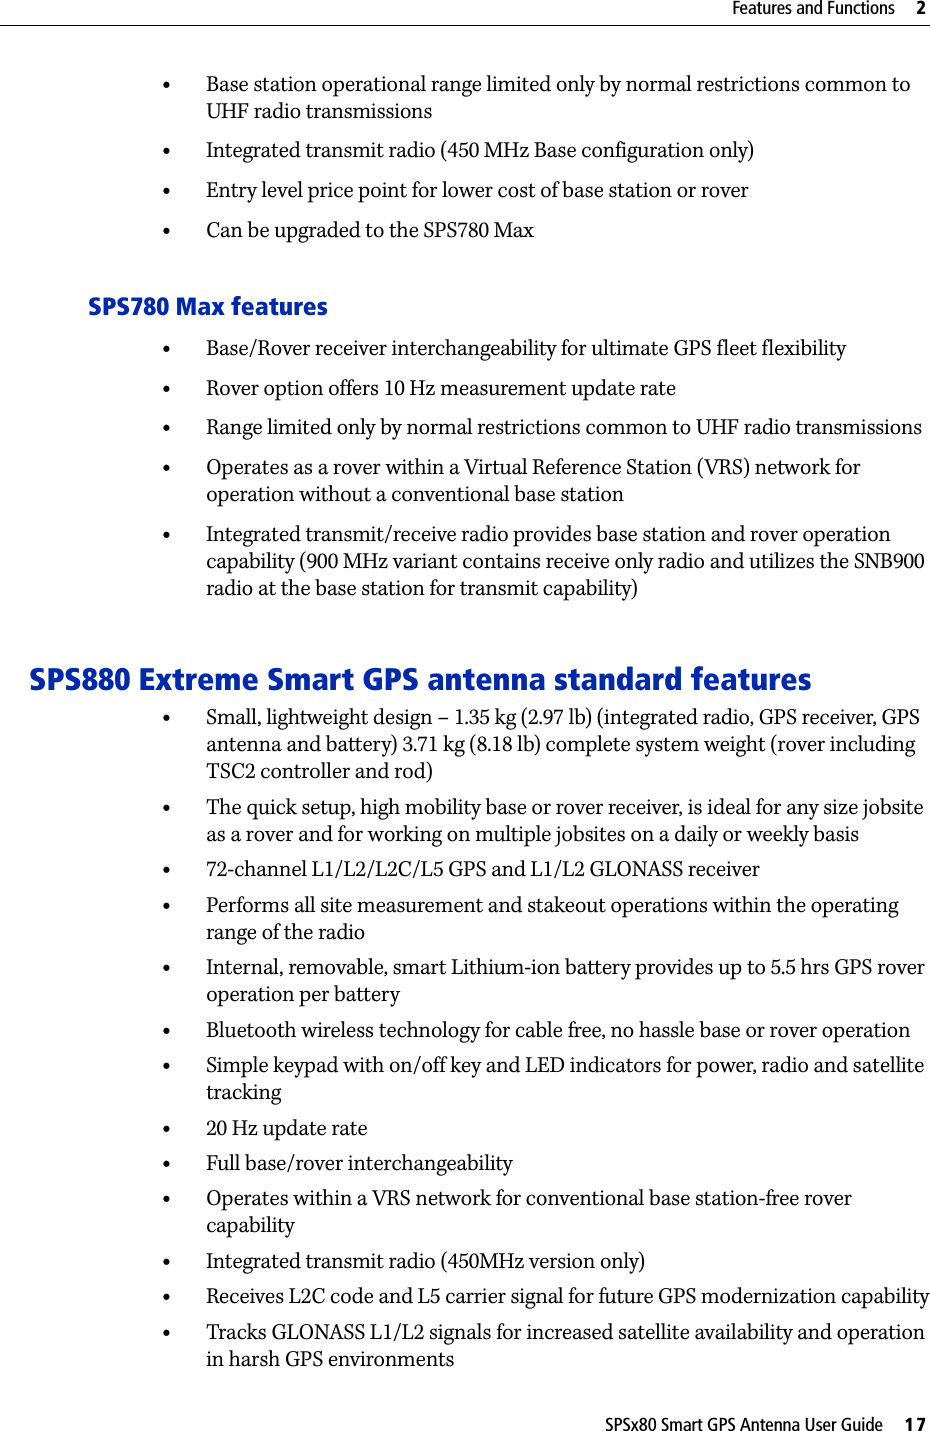 SPSx80 Smart GPS Antenna User Guide     17Features and Functions     2•Base station operational range limited only by normal restrictions common to UHF radio transmissions•Integrated transmit radio (450 MHz Base configuration only)•Entry level price point for lower cost of base station or rover•Can be upgraded to the SPS780 MaxSPS780 Max features•Base/Rover receiver interchangeability for ultimate GPS fleet flexibility•Rover option offers 10 Hz measurement update rate•Range limited only by normal restrictions common to UHF radio transmissions•Operates as a rover within a Virtual Reference Station (VRS) network for operation without a conventional base station •Integrated transmit/receive radio provides base station and rover operation capability (900 MHz variant contains receive only radio and utilizes the SNB900 radio at the base station for transmit capability) SPS880 Extreme Smart GPS antenna standard features•Small, lightweight design – 1.35 kg (2.97 lb) (integrated radio, GPS receiver, GPS antenna and battery) 3.71 kg (8.18 lb) complete system weight (rover including TSC2 controller and rod)•The quick setup, high mobility base or rover receiver, is ideal for any size jobsite as a rover and for working on multiple jobsites on a daily or weekly basis•72-channel L1/L2/L2C/L5 GPS and L1/L2 GLONASS receiver•Performs all site measurement and stakeout operations within the operating range of the radio•Internal, removable, smart Lithium-ion battery provides up to 5.5 hrs GPS rover operation per battery •Bluetooth wireless technology for cable free, no hassle base or rover operation•Simple keypad with on/off key and LED indicators for power, radio and satellite tracking•20 Hz update rate•Full base/rover interchangeability•Operates within a VRS network for conventional base station-free rover capability•Integrated transmit radio (450MHz version only)•Receives L2C code and L5 carrier signal for future GPS modernization capability•Tracks GLONASS L1/L2 signals for increased satellite availability and operation in harsh GPS environments